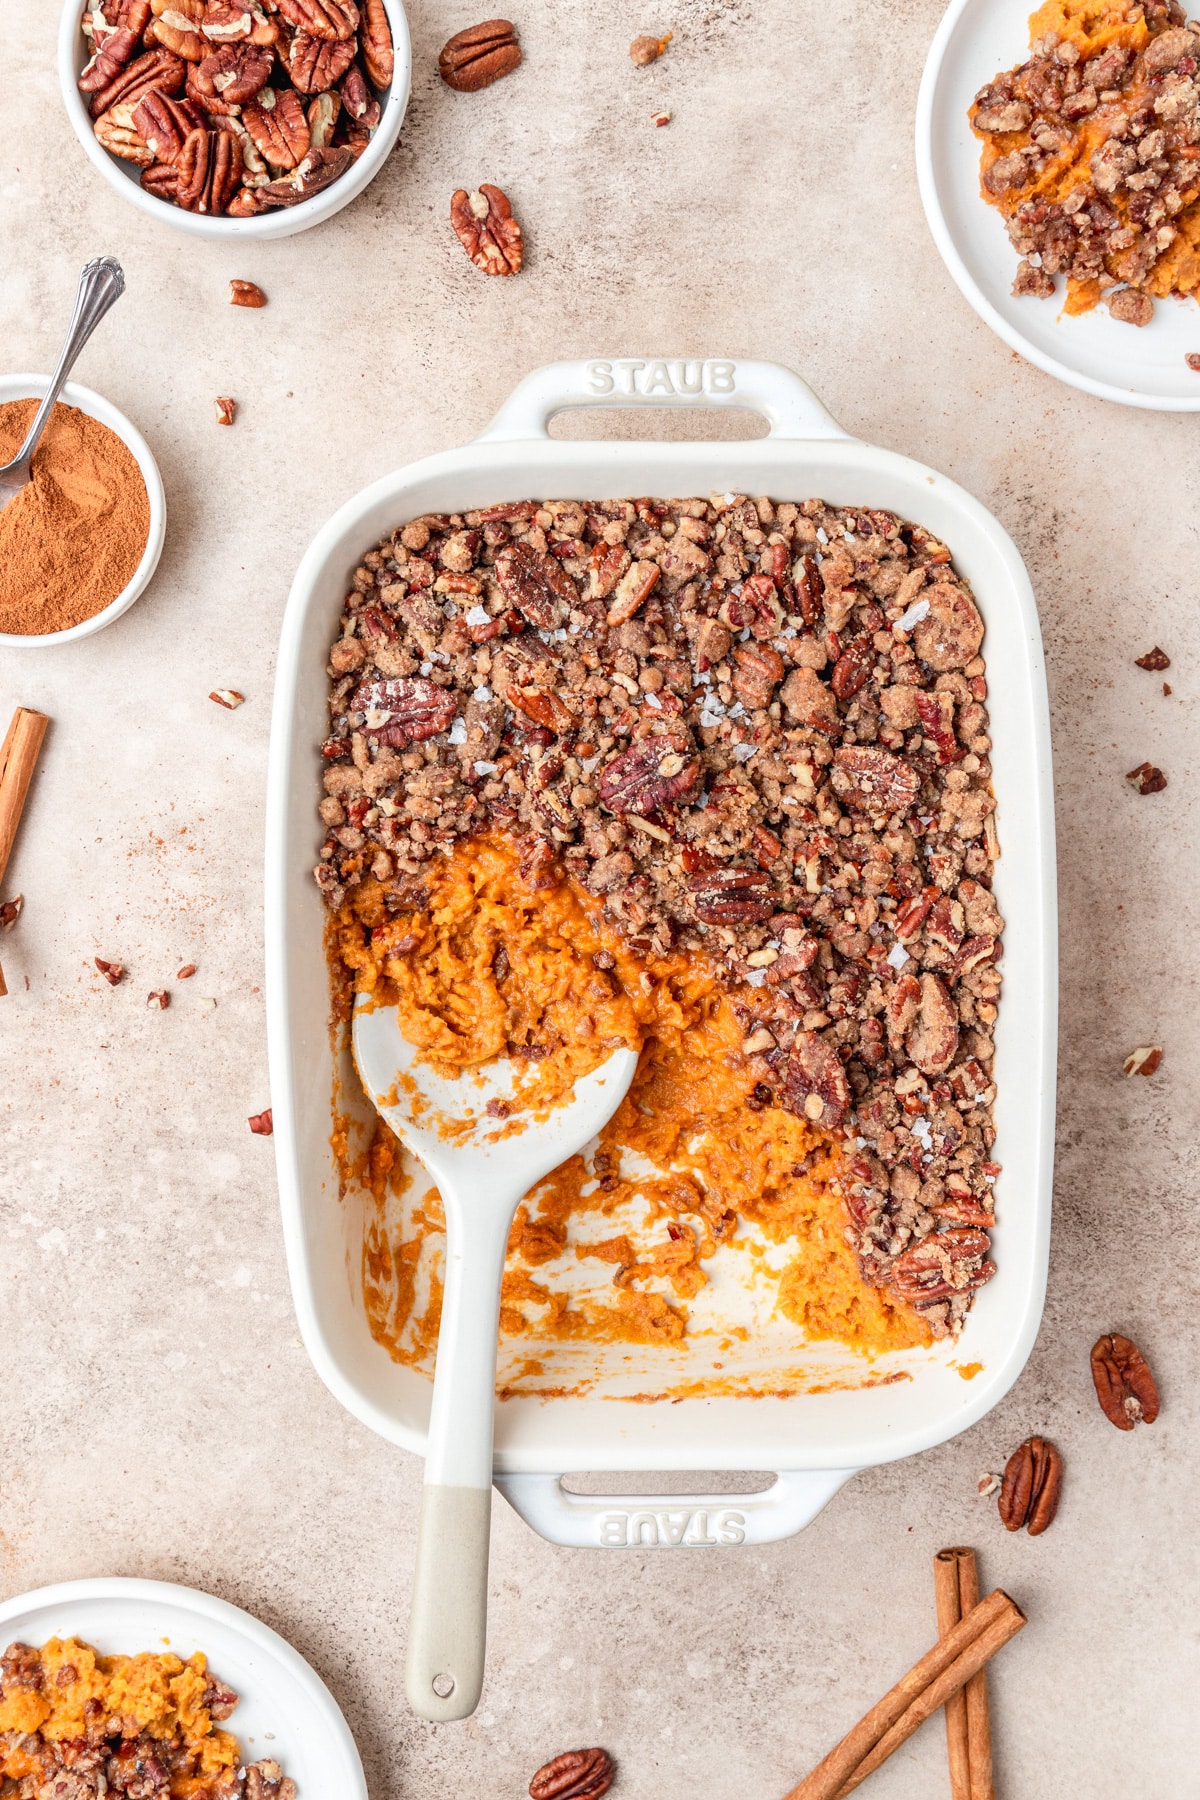 sweet potato casserole with pecan topping.